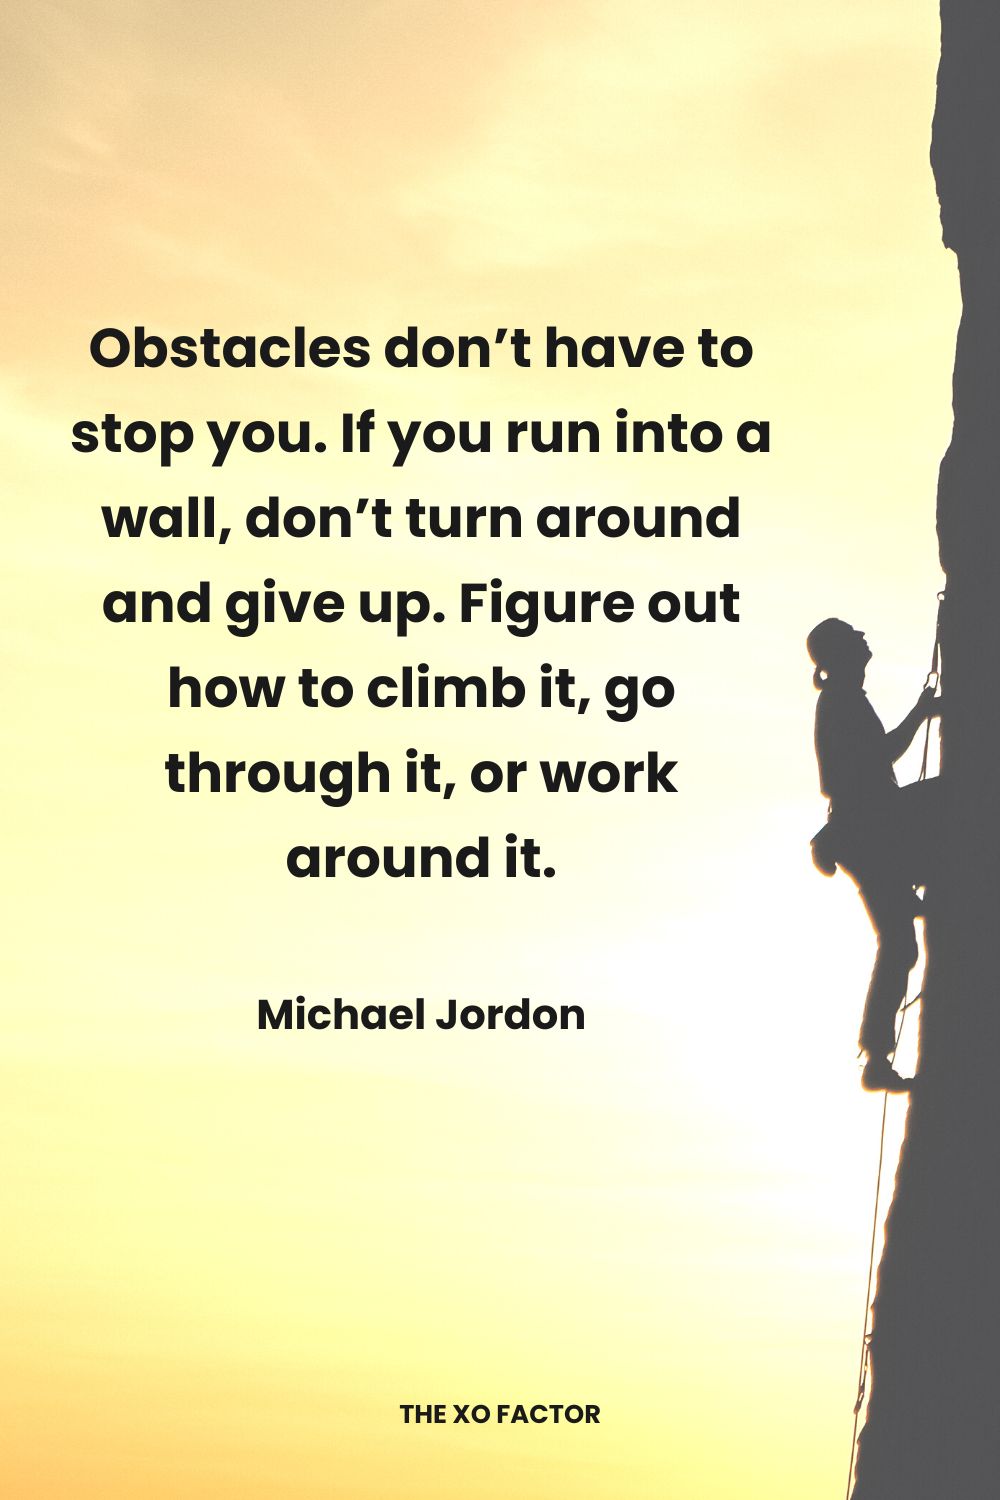 Obstacles don’t have to stop you. If you run into a wall, don’t turn around and give up. Figure out how to climb it, go through it, or work around it.” Michael Jordon